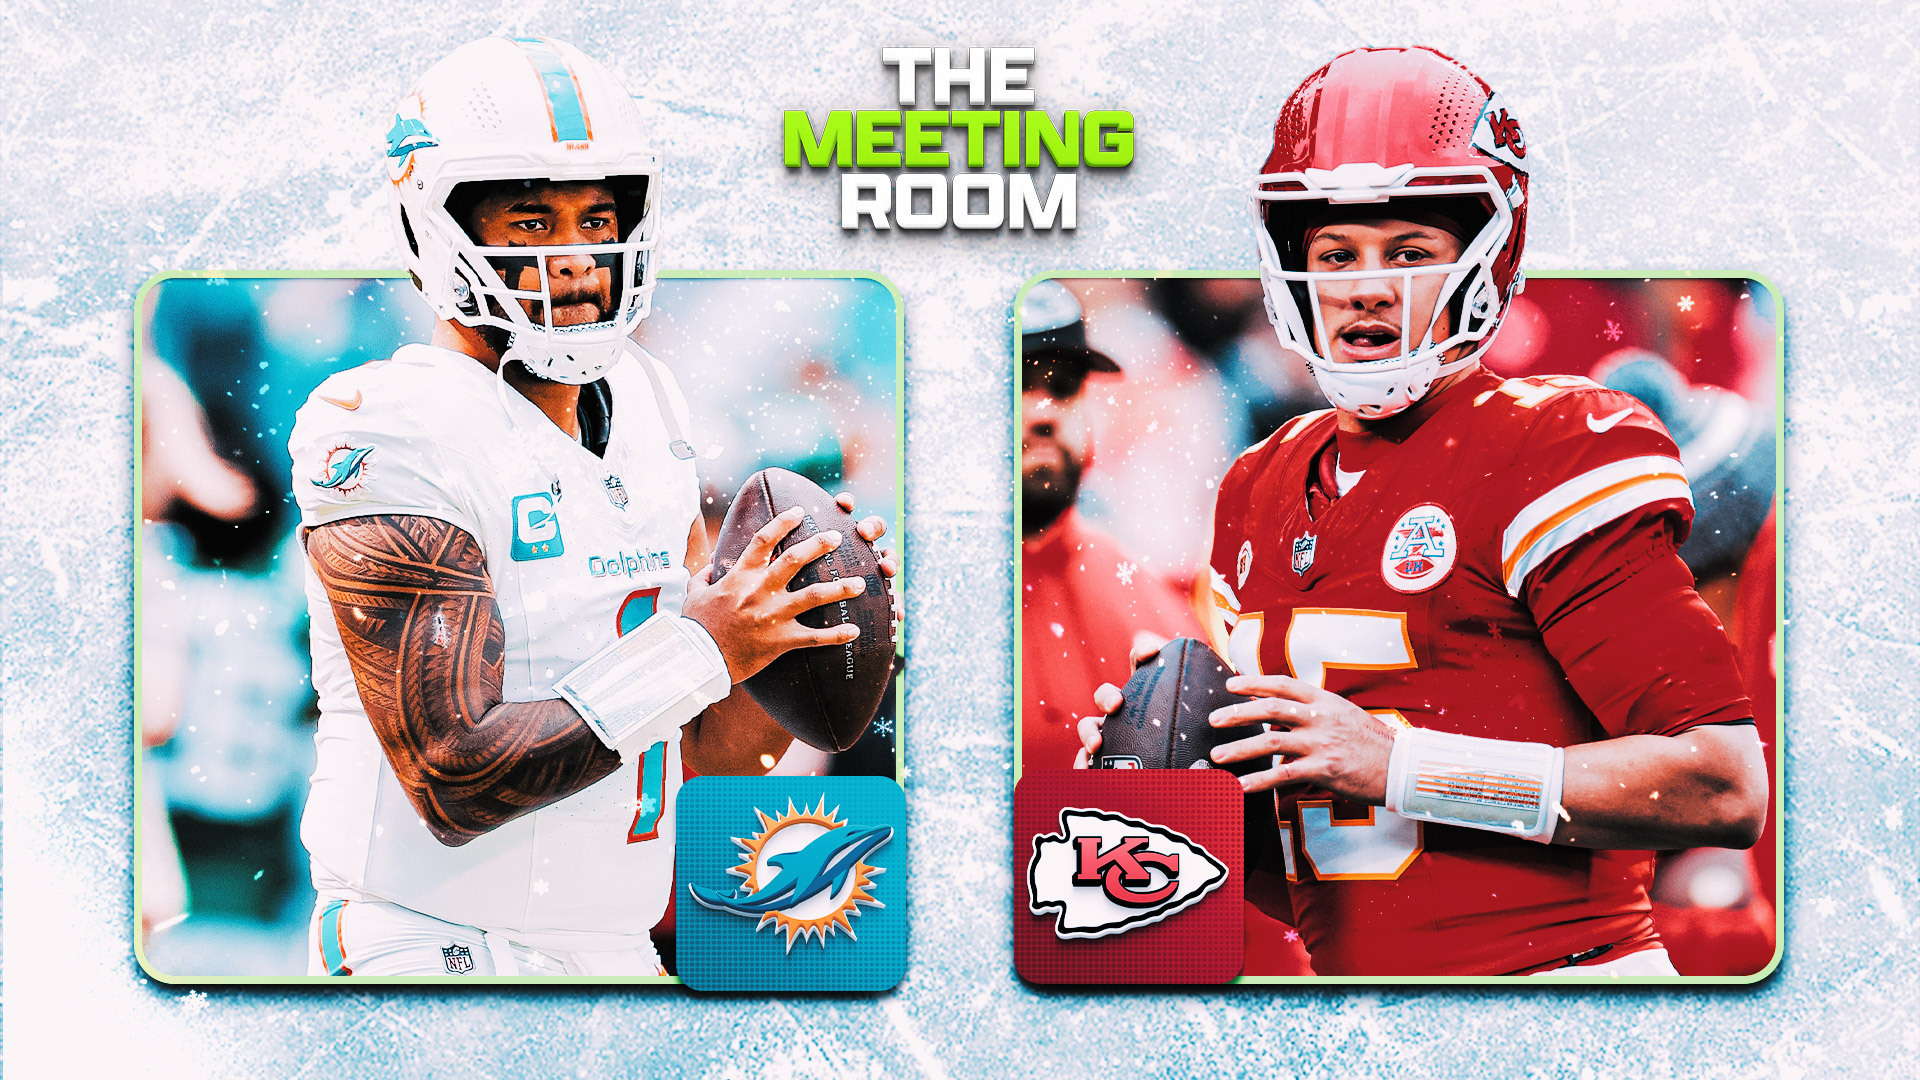 Meeting Room graphic featuring Tua Tagovailoa (in white) and Patrick Mahomes (in red) in front of a snowy background